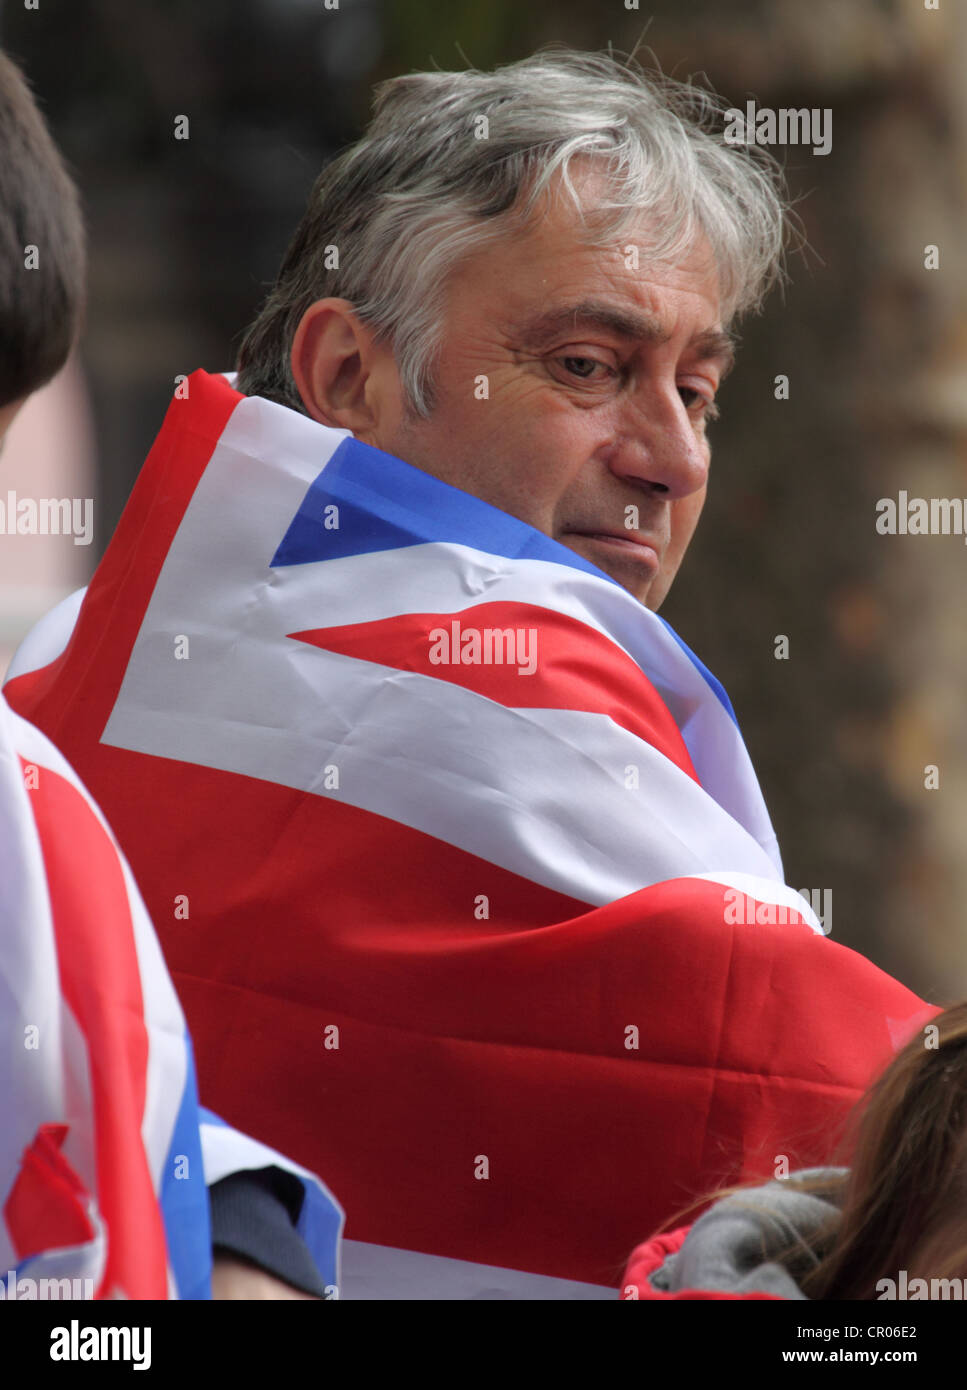 Man wearing a Union flag on the Mall at Buckingham Palace awaiting the arrival of the Queen. Stock Photo